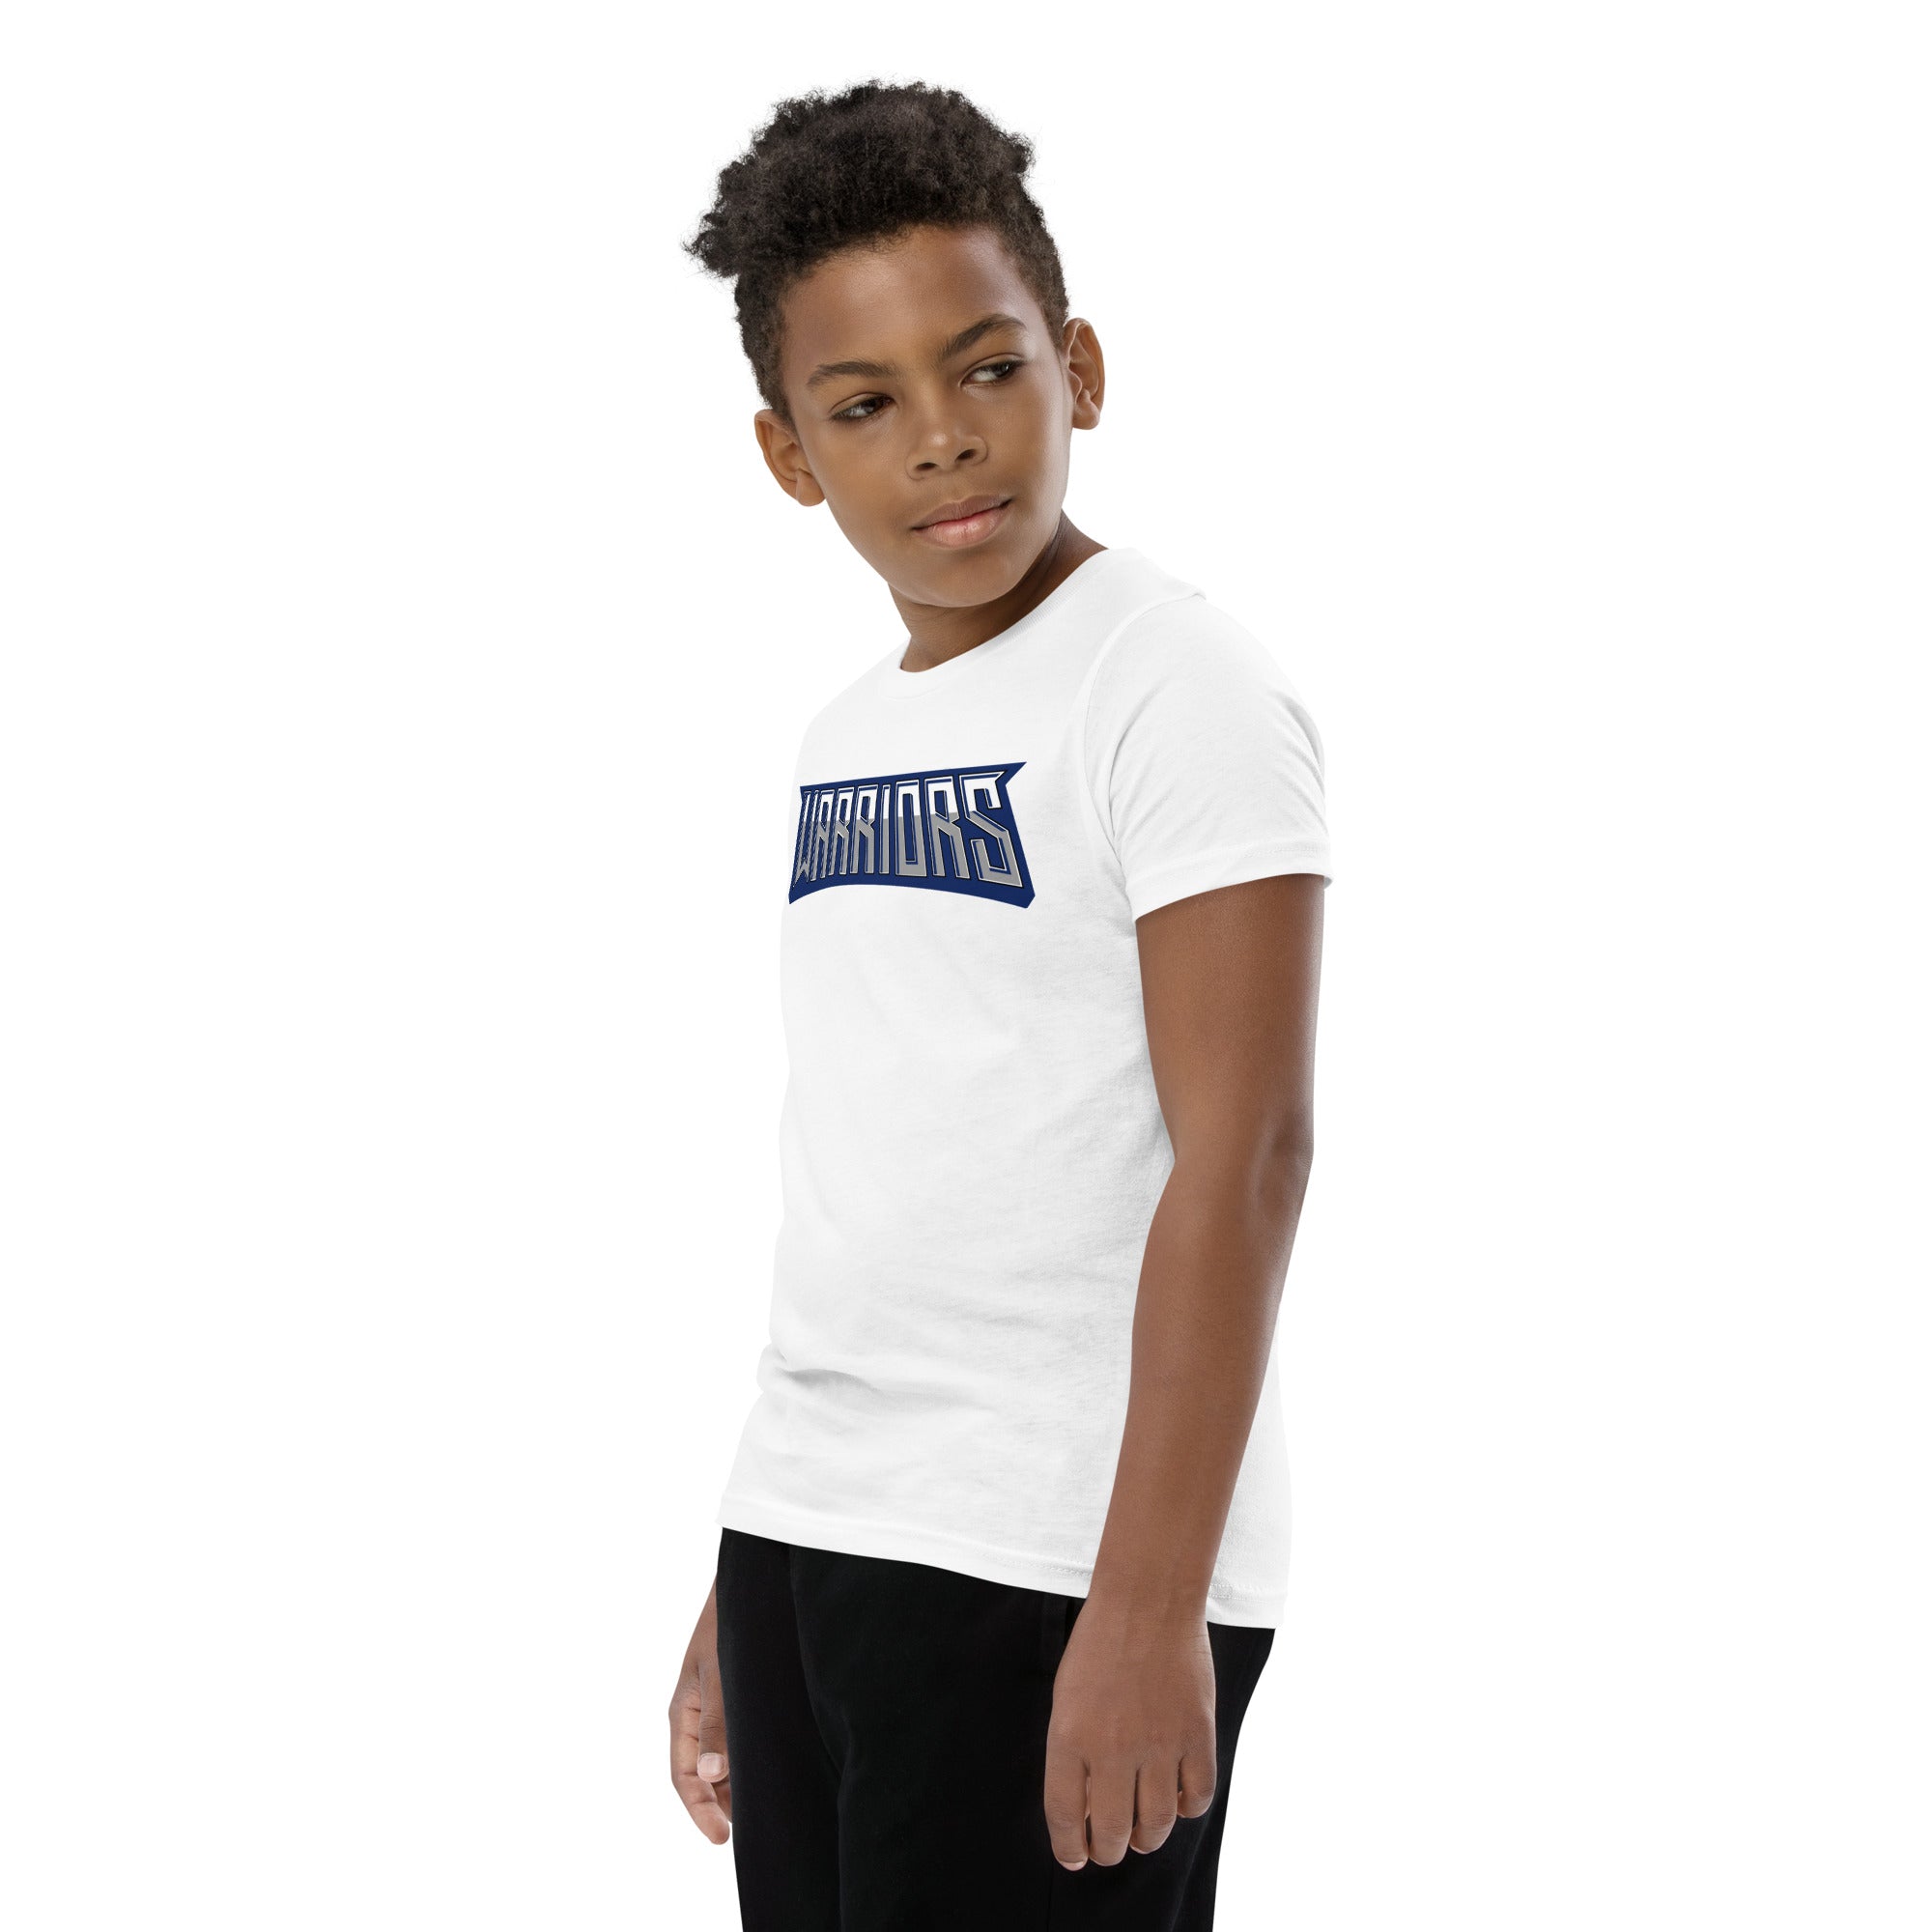 Tampa Warriors Word Seal Youth Short Sleeve T-Shirt